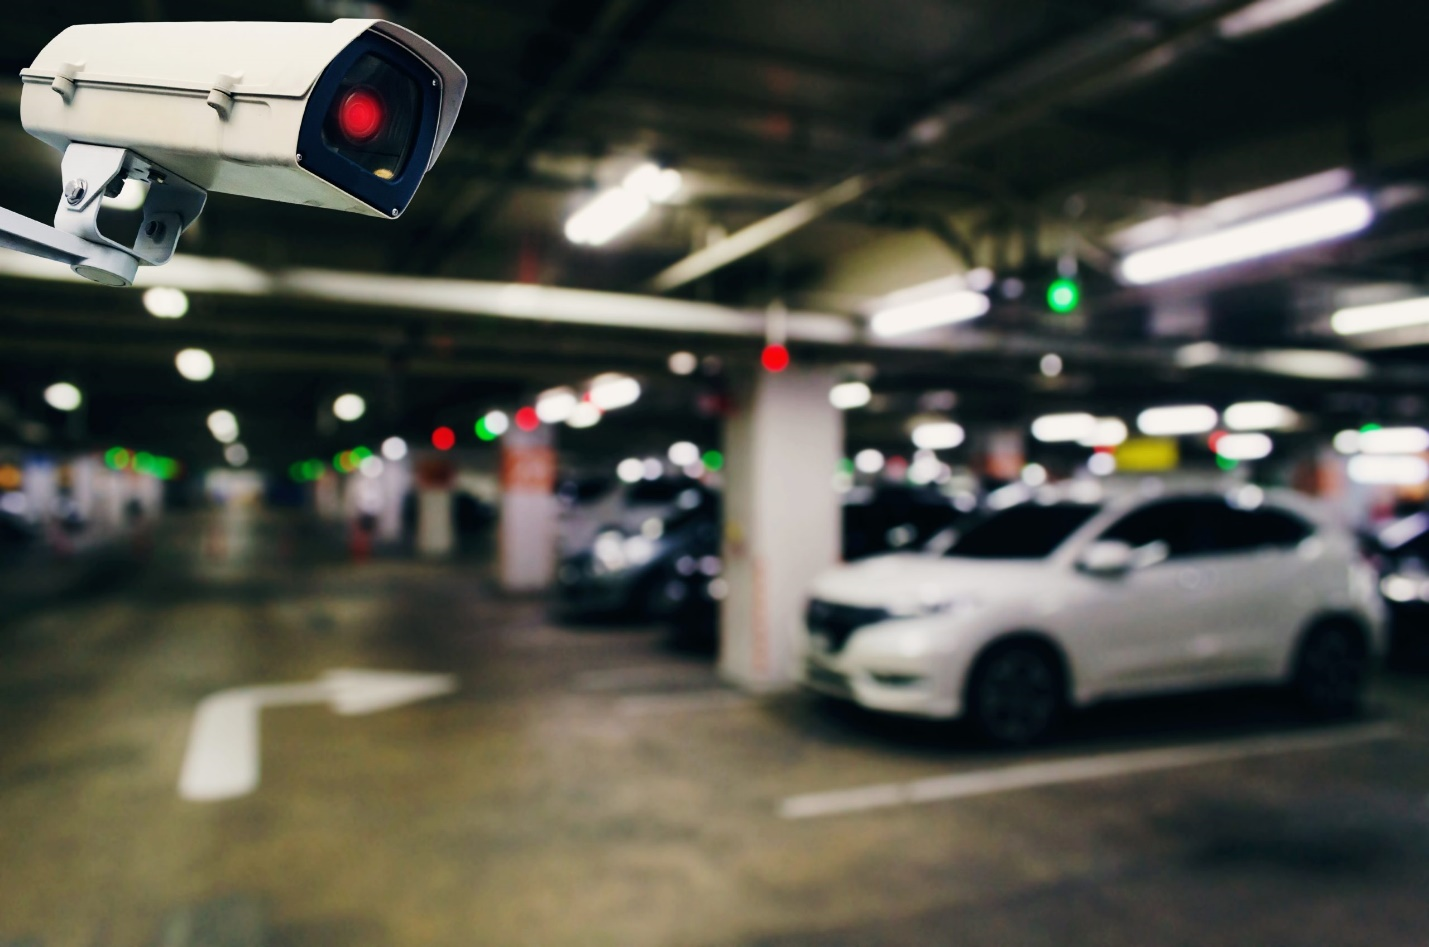 security cameras in garages and parking lots prevent solve crimes